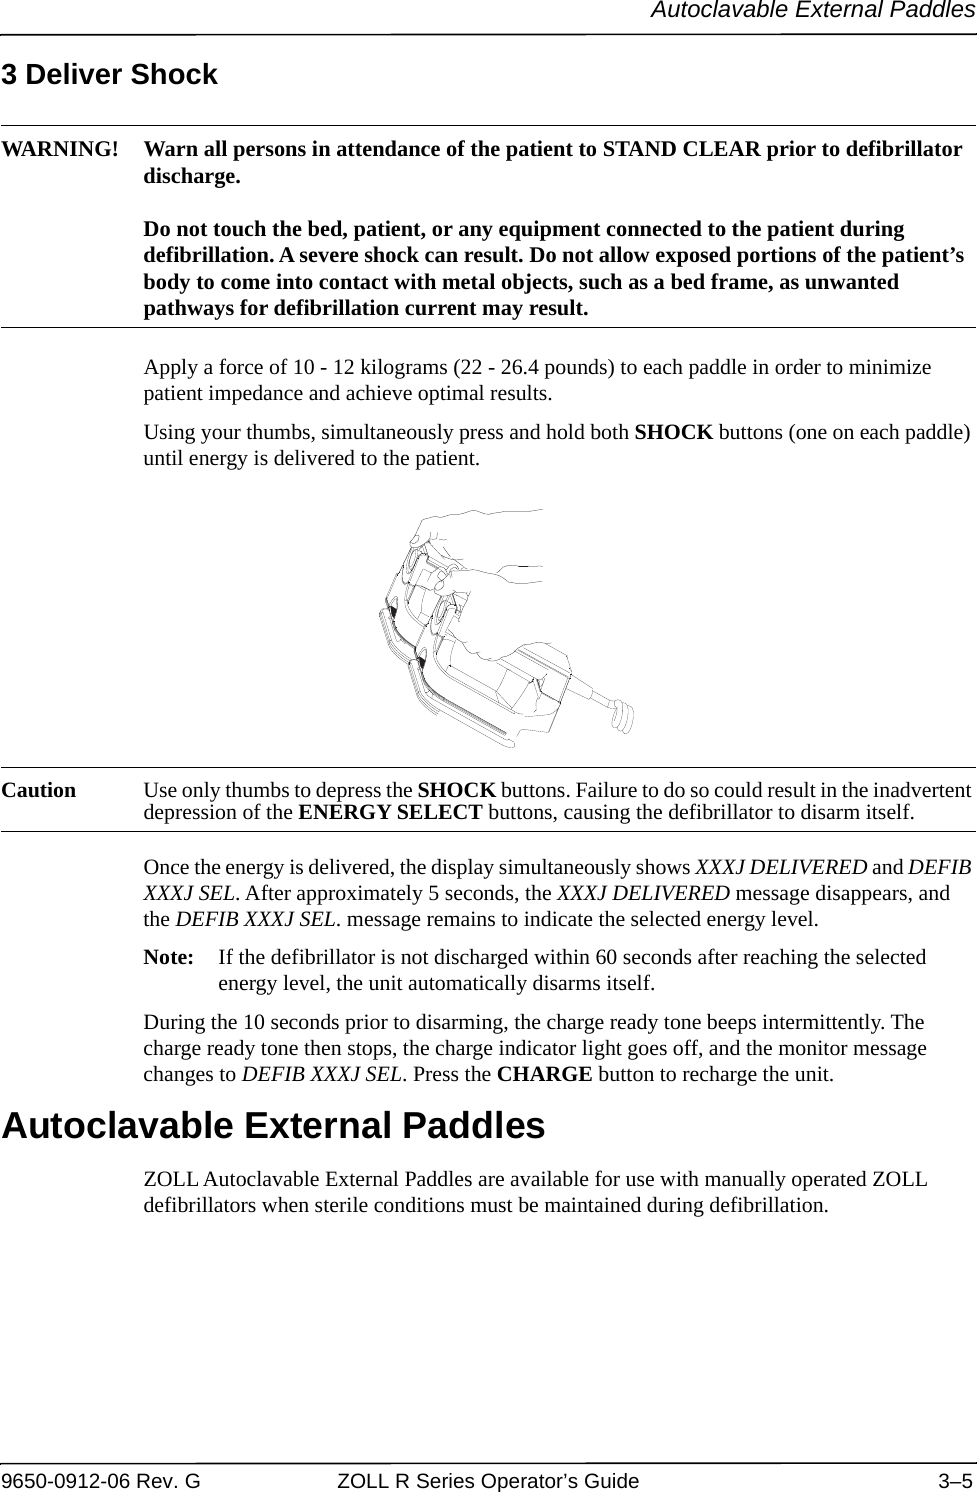 Autoclavable External Paddles9650-0912-06 Rev. G ZOLL R Series Operator’s Guide 3–53 Deliver ShockWARNING! Warn all persons in attendance of the patient to STAND CLEAR prior to defibrillator discharge.Do not touch the bed, patient, or any equipment connected to the patient during defibrillation. A severe shock can result. Do not allow exposed portions of the patient’s body to come into contact with metal objects, such as a bed frame, as unwanted pathways for defibrillation current may result.Apply a force of 10 - 12 kilograms (22 - 26.4 pounds) to each paddle in order to minimize patient impedance and achieve optimal results.Using your thumbs, simultaneously press and hold both SHOCK buttons (one on each paddle) until energy is delivered to the patient.Caution Use only thumbs to depress the SHOCK buttons. Failure to do so could result in the inadvertent depression of the ENERGY SELECT buttons, causing the defibrillator to disarm itself.Once the energy is delivered, the display simultaneously shows XXXJ DELIVERED and DEFIB XXXJ SEL. After approximately 5 seconds, the XXXJ DELIVERED message disappears, and the DEFIB XXXJ SEL. message remains to indicate the selected energy level.Note: If the defibrillator is not discharged within 60 seconds after reaching the selected energy level, the unit automatically disarms itself.During the 10 seconds prior to disarming, the charge ready tone beeps intermittently. The charge ready tone then stops, the charge indicator light goes off, and the monitor message changes to DEFIB XXXJ SEL. Press the CHARGE button to recharge the unit.Autoclavable External PaddlesZOLL Autoclavable External Paddles are available for use with manually operated ZOLL defibrillators when sterile conditions must be maintained during defibrillation.